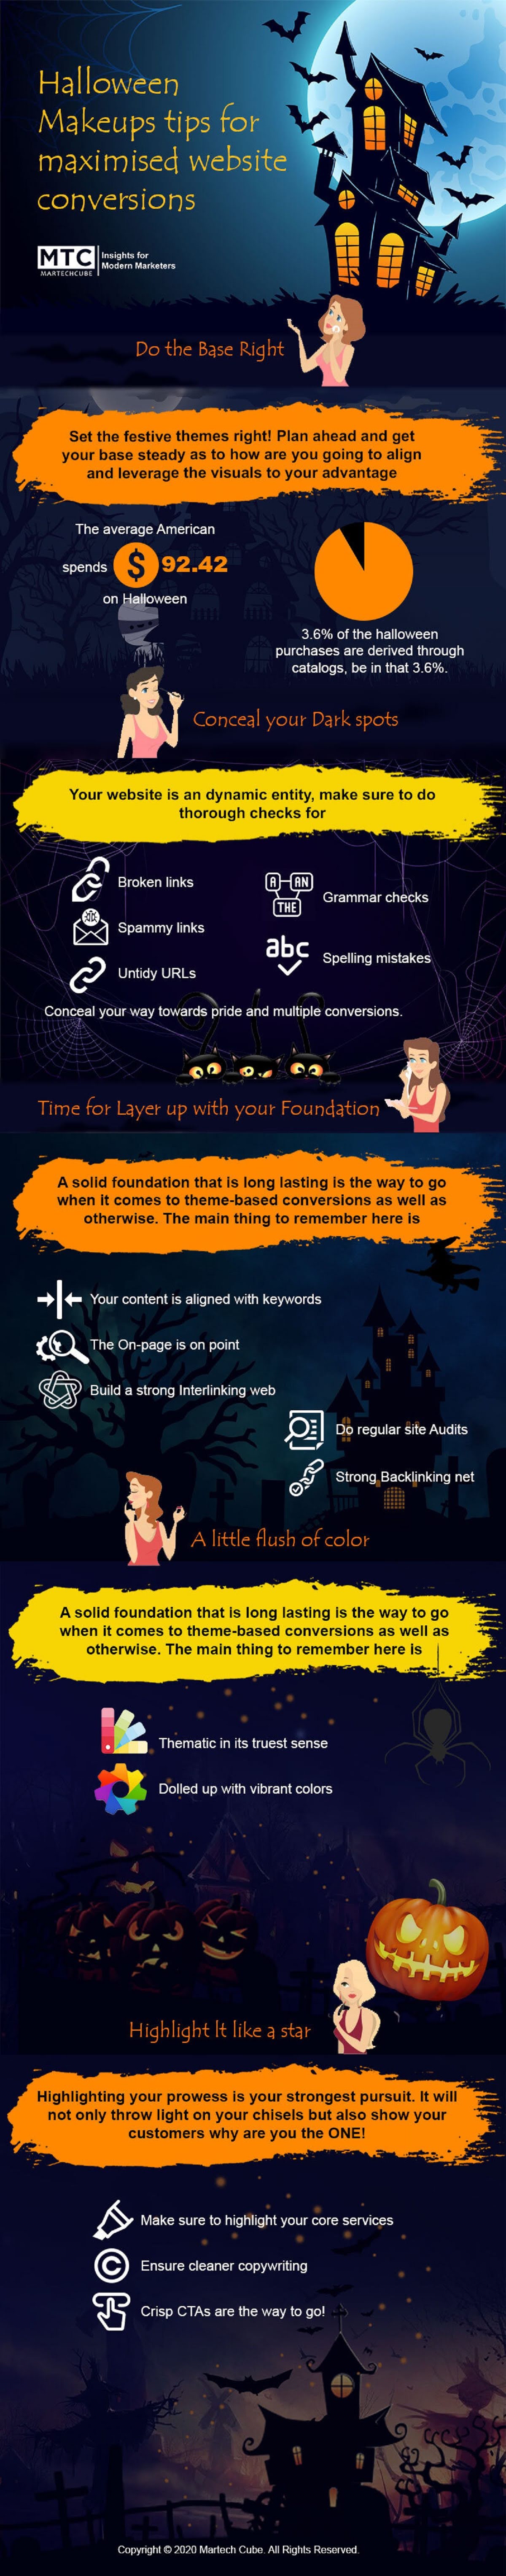 halloween-makeup-tips-for-maximized-website-conversions-infographic